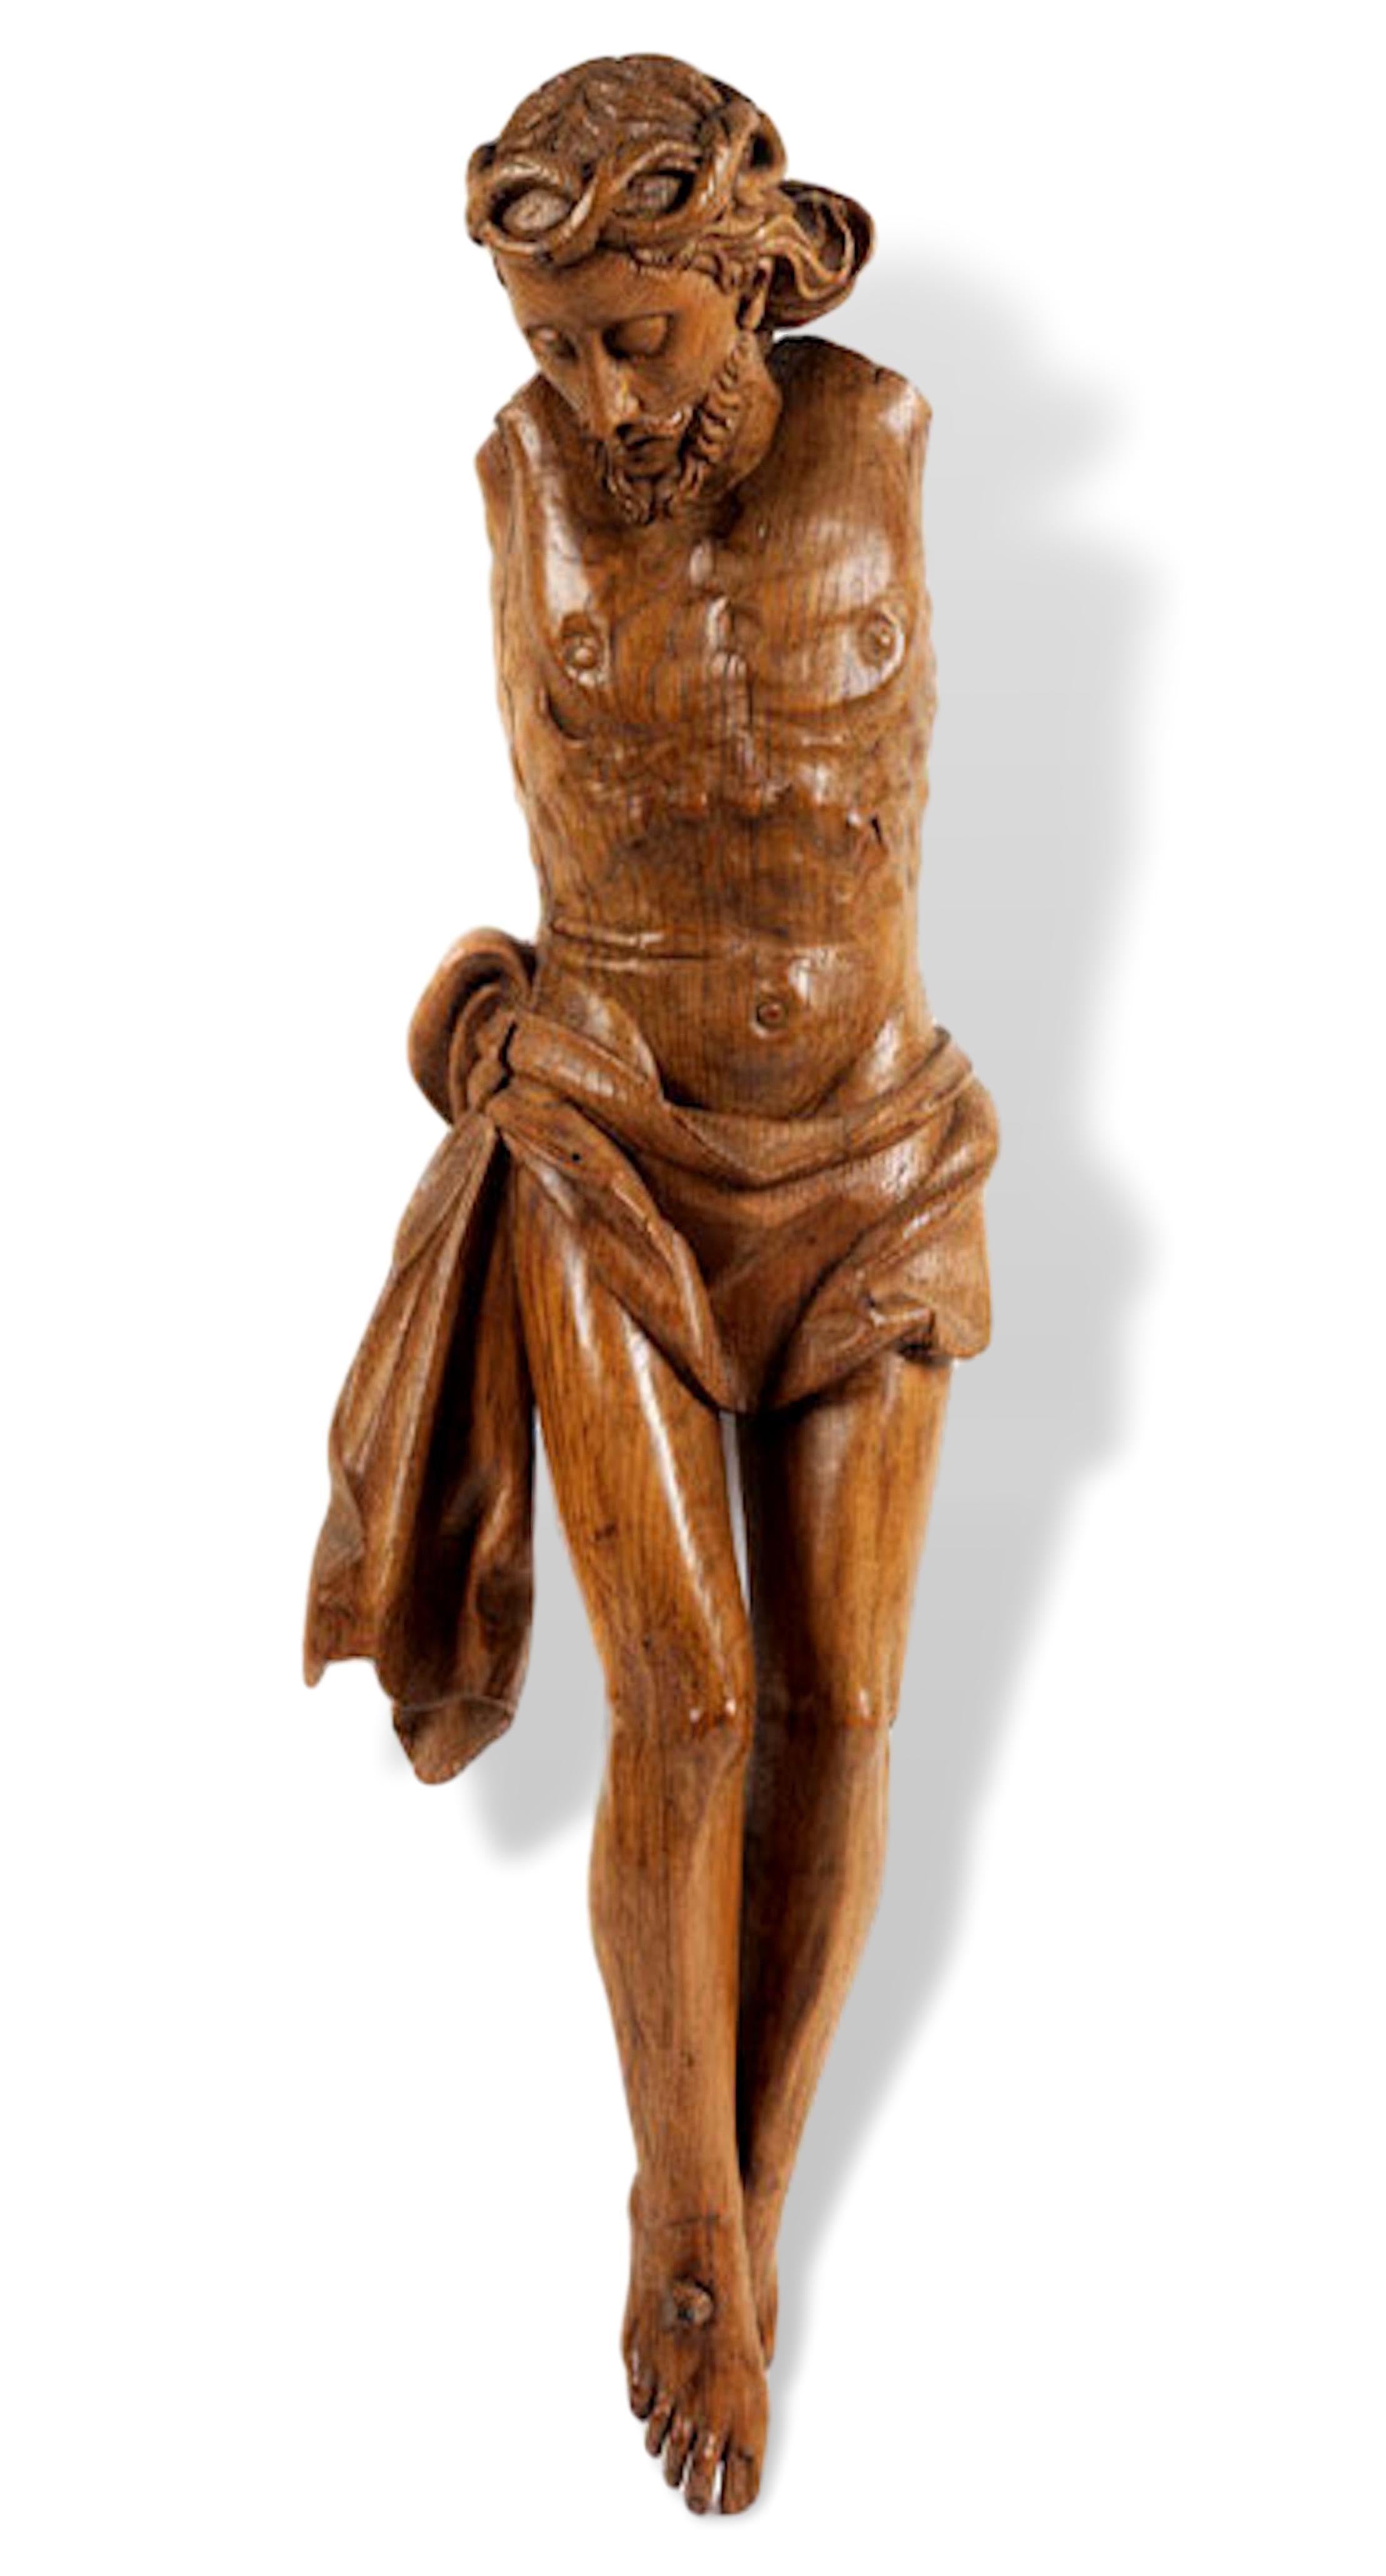 Unknown Figurative Sculpture - Christ crucified Wood sculpture Flemish 16th century Old master Religious Art 